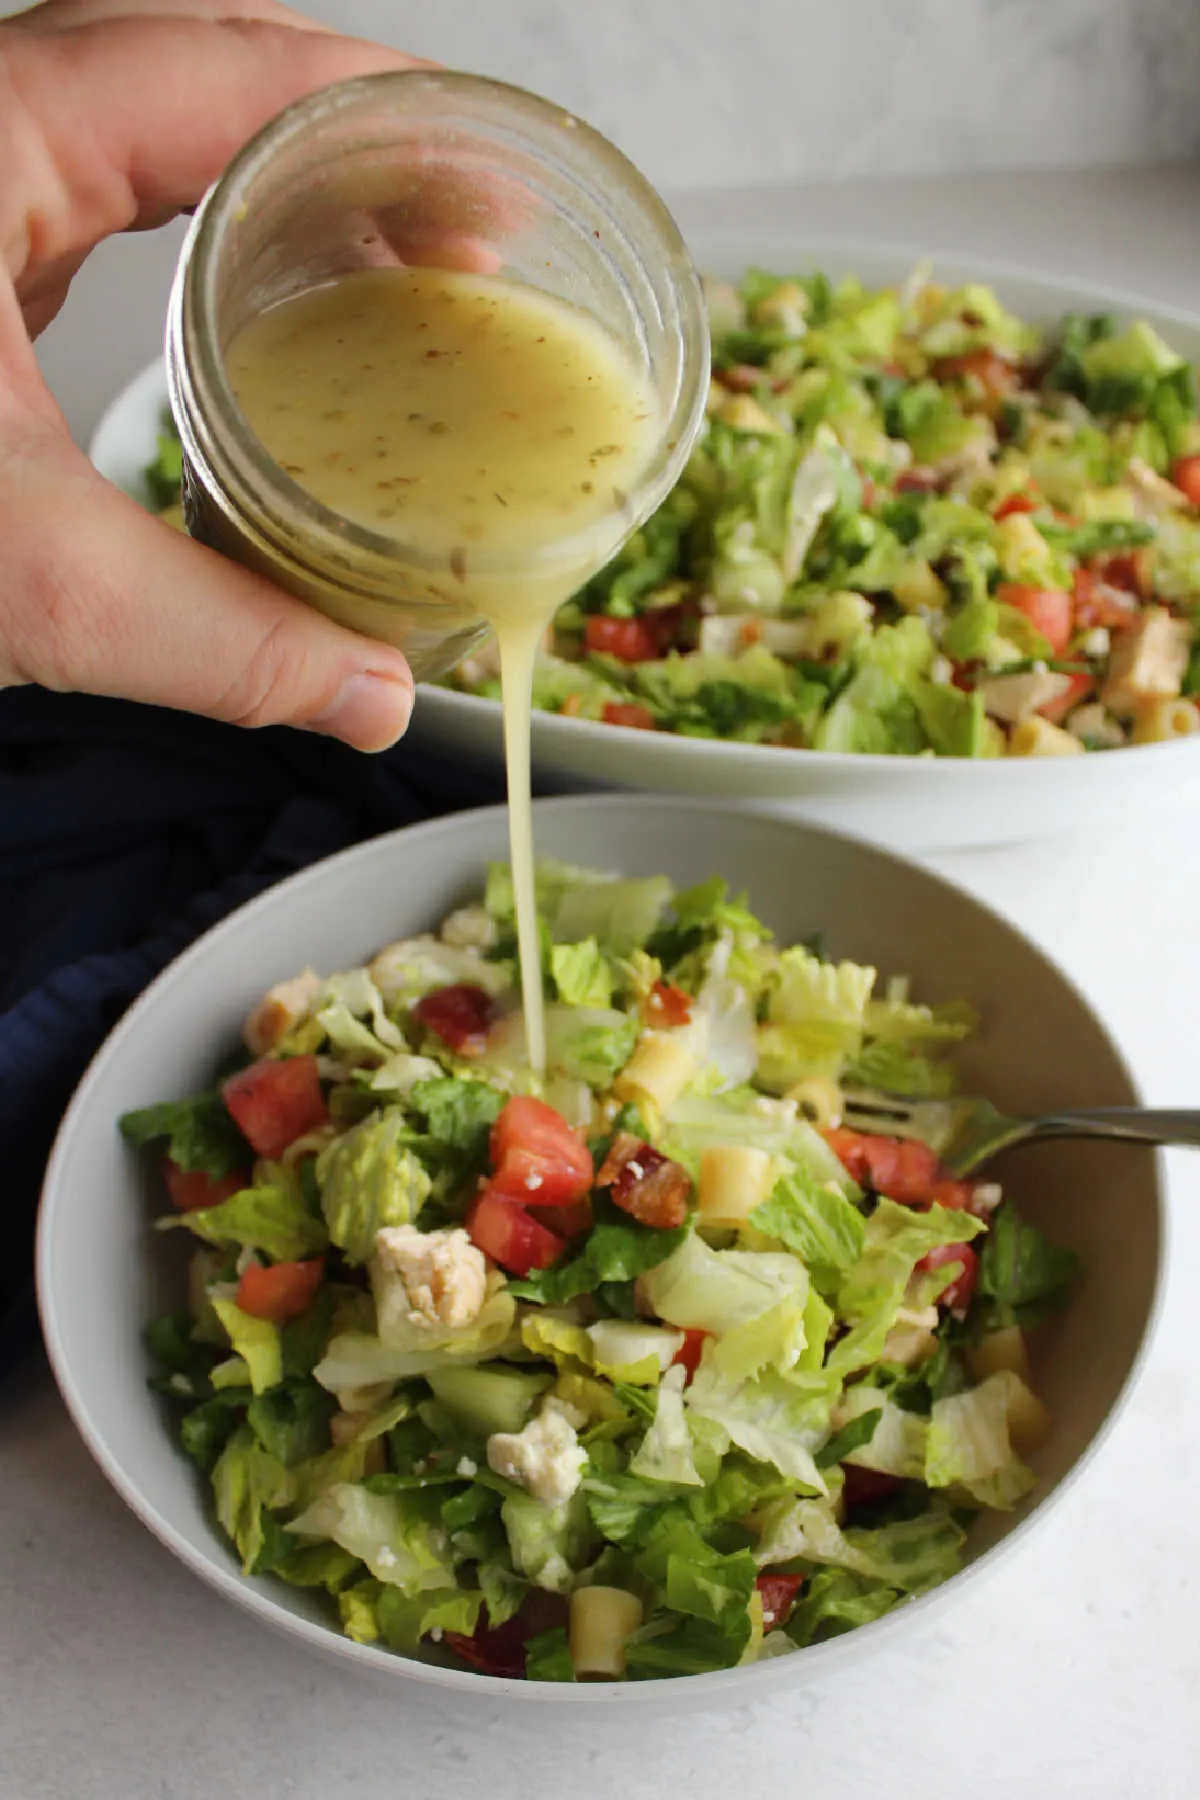 Pouring salad dressing over small bowl of chopped salad.